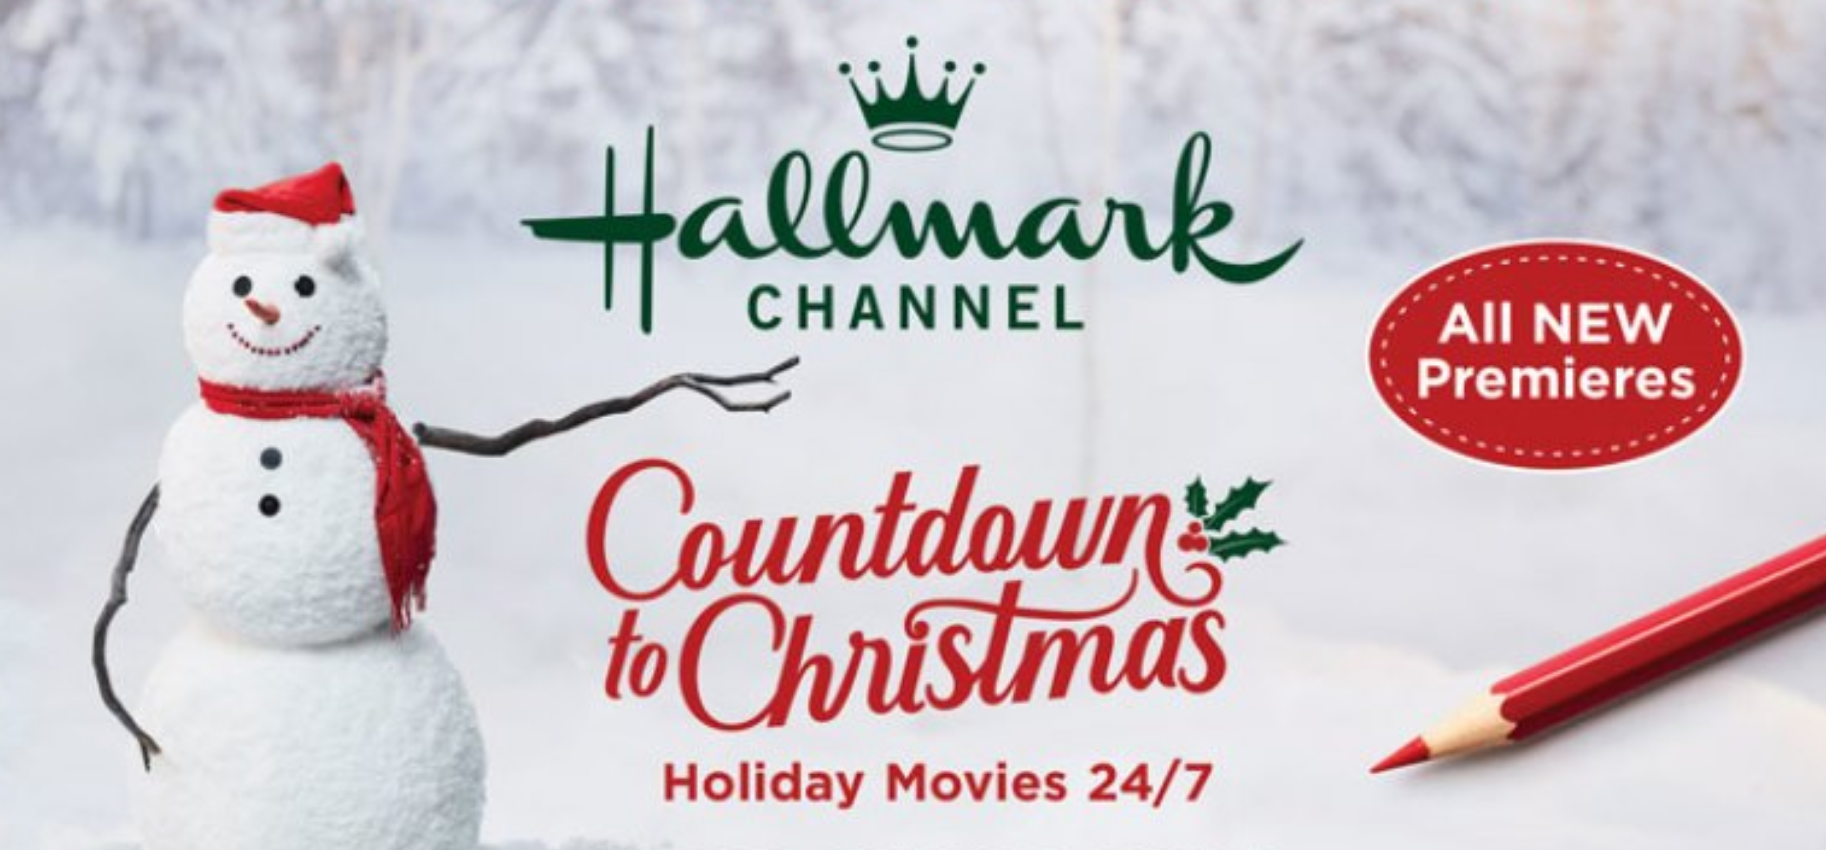 All the new Hallmark Christmas movies you can watch in December 2020